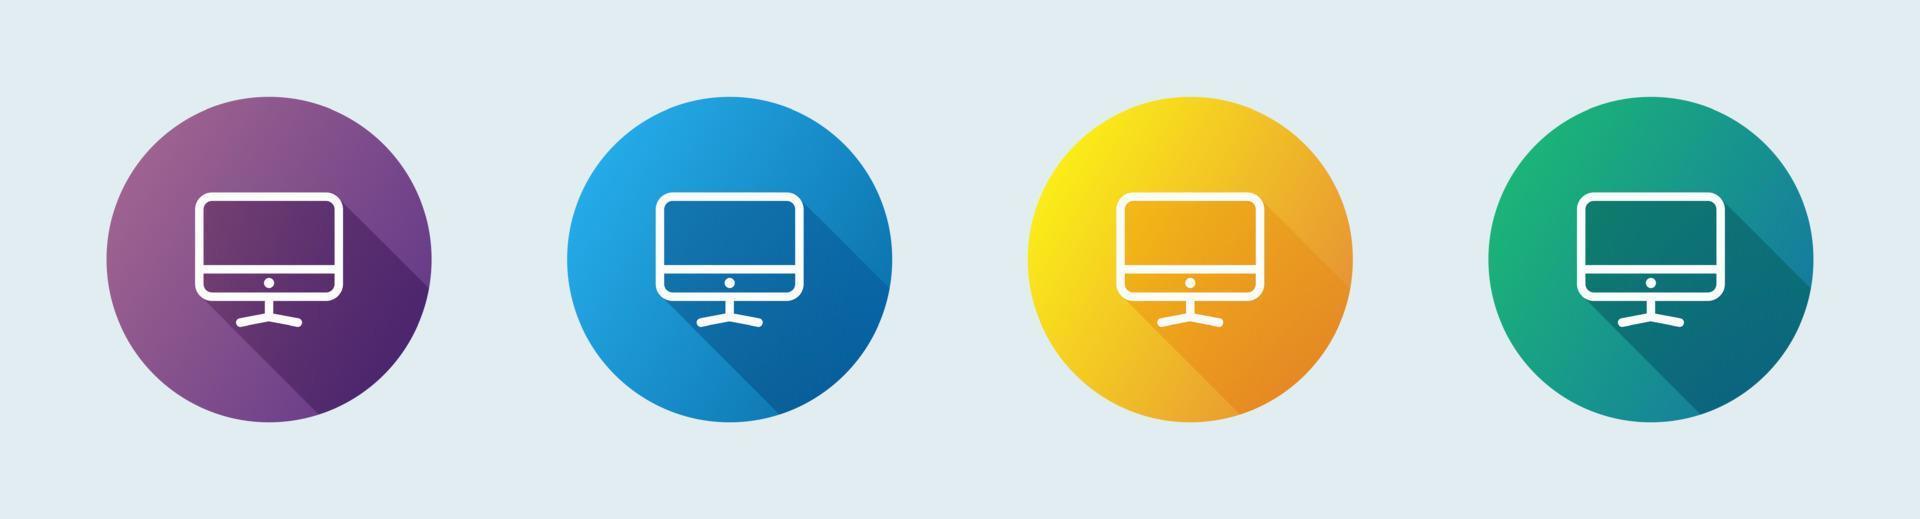 Computer line icon in flat design style. Desktop monitor signs vector illustration.